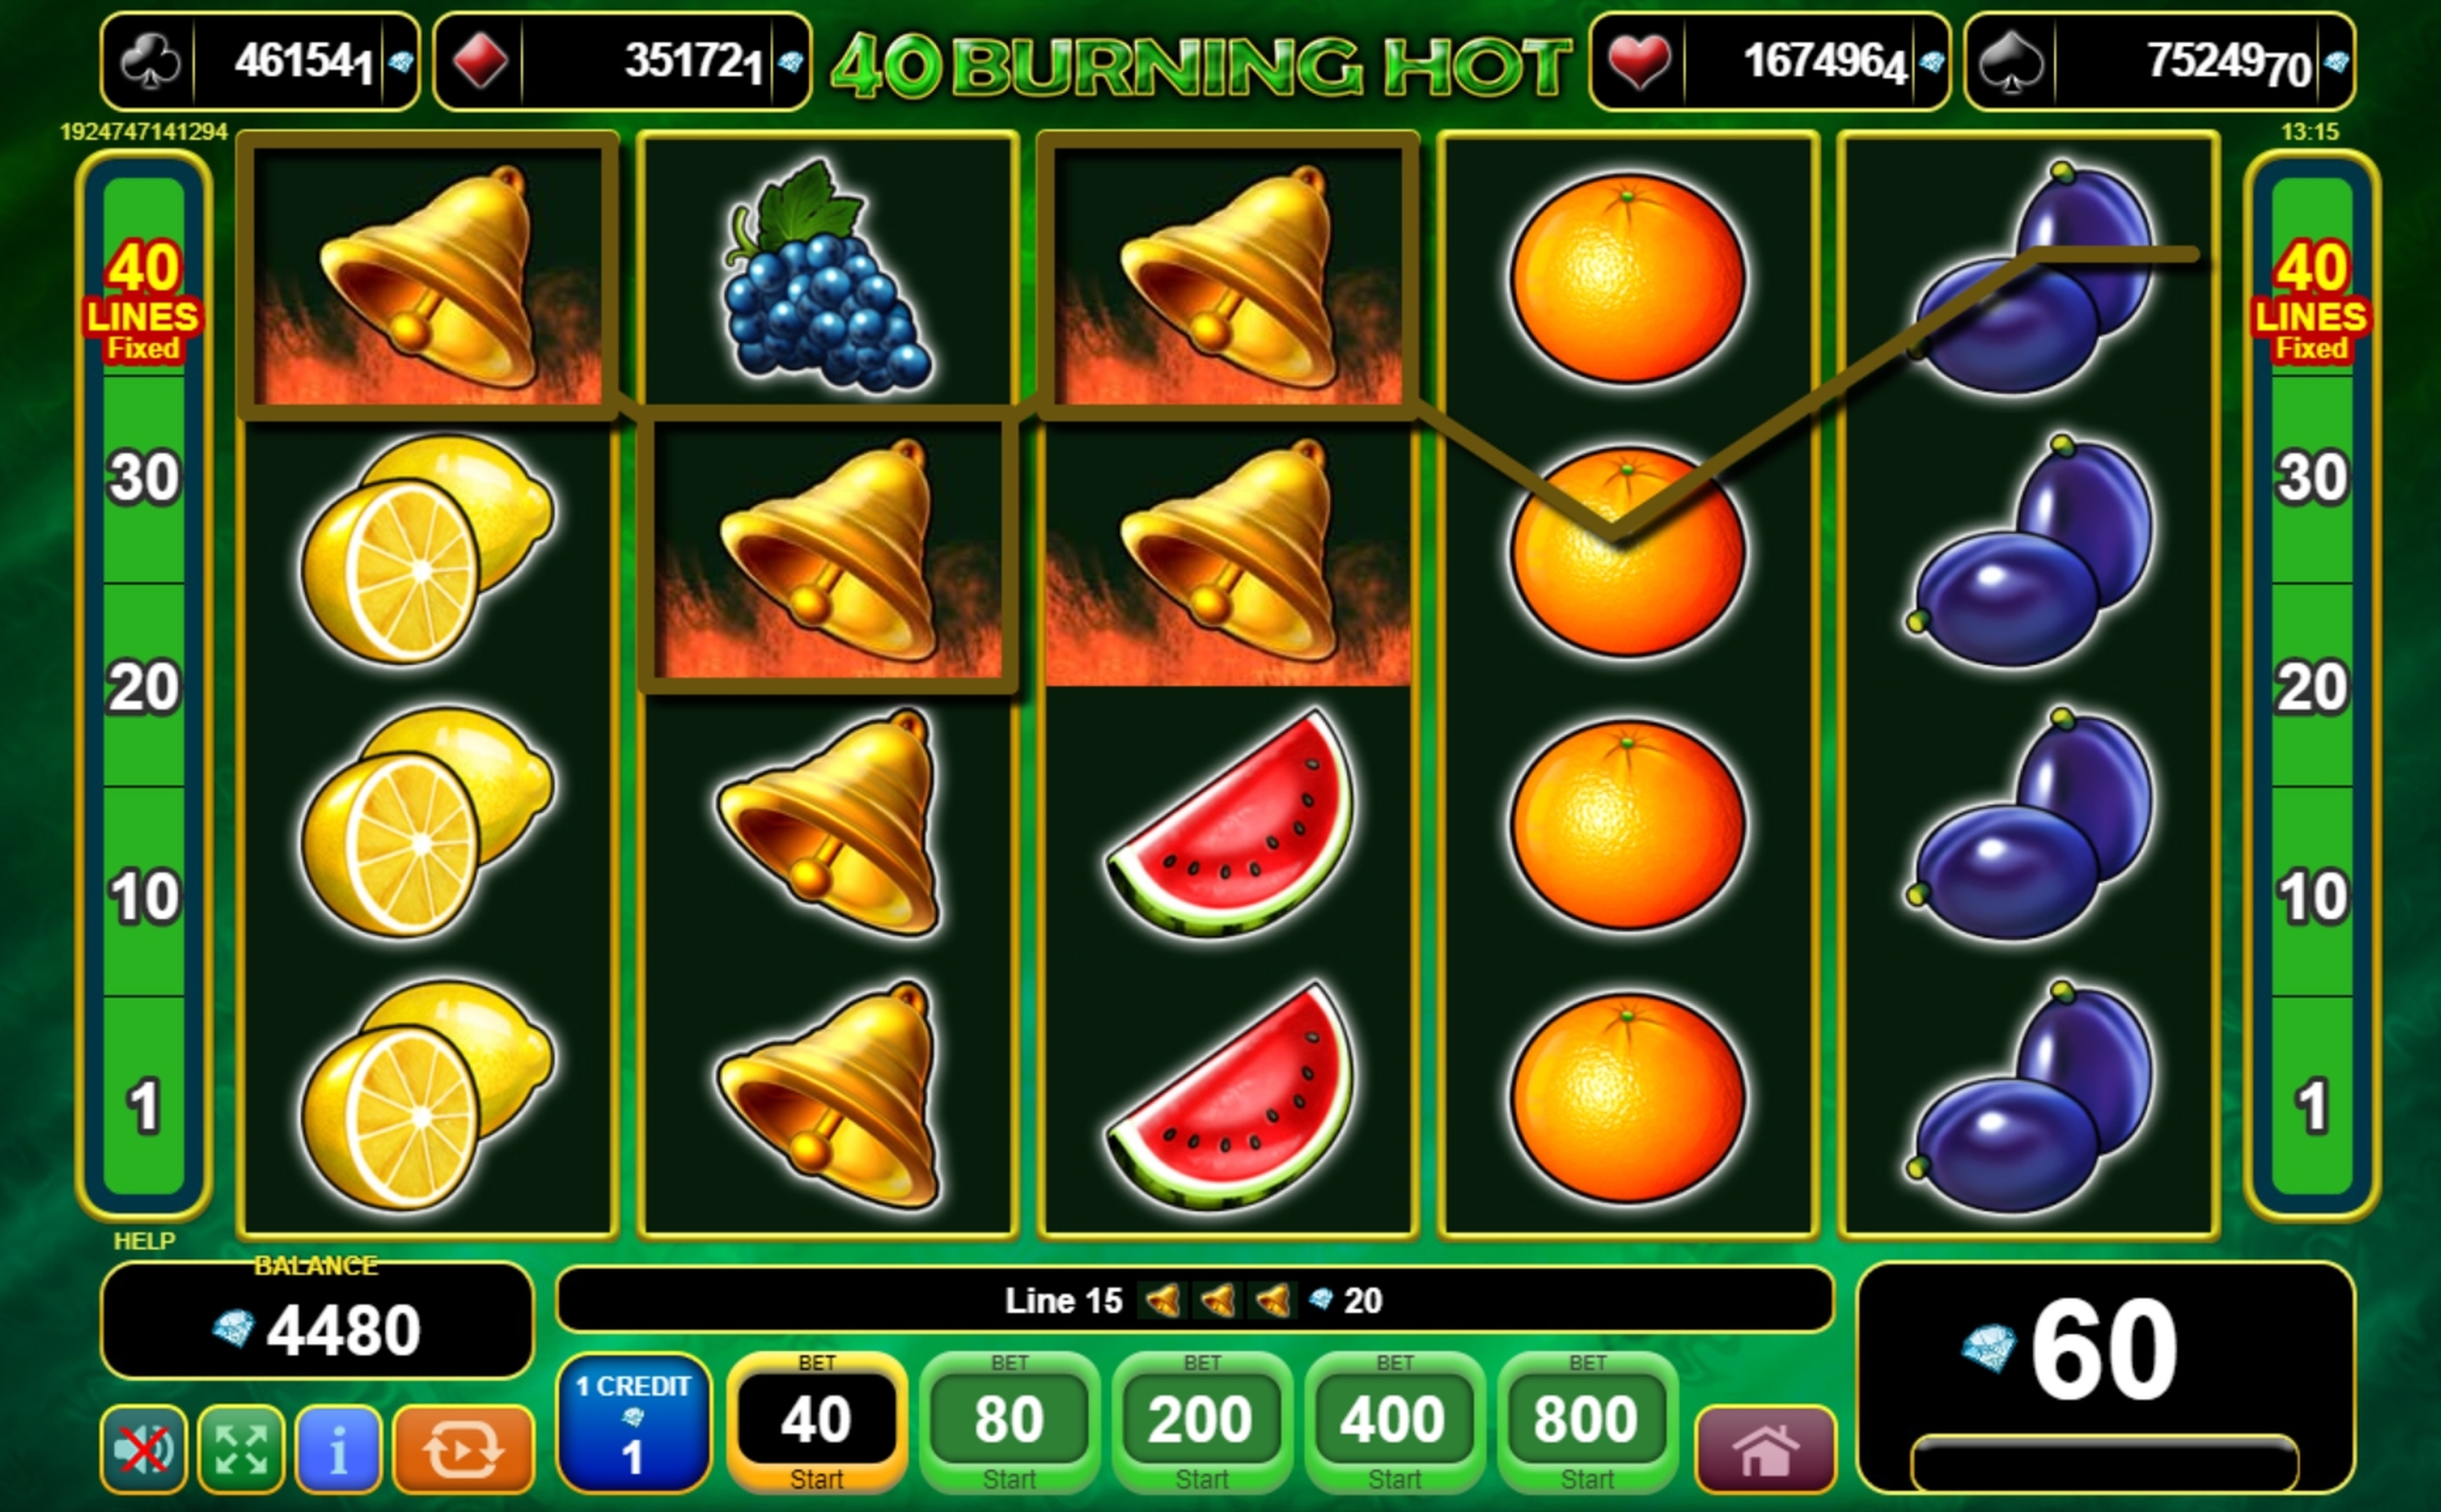 Win Money in 40 Burning Hot Free Slot Game by EGT